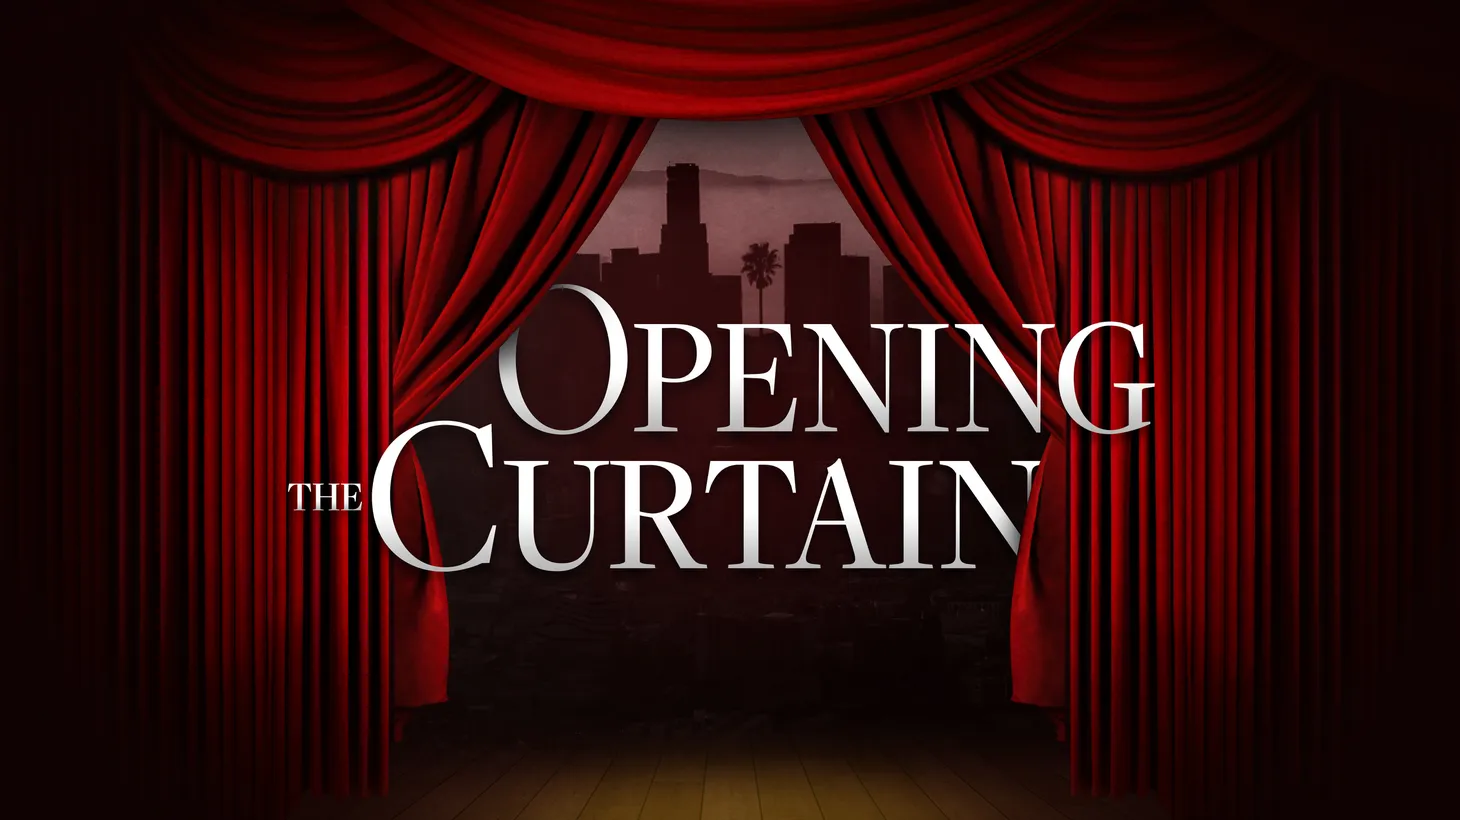 Antaeus Theatre Company didn't just open Cat on a Hot Tin Roof, it also opened a brand new theater in Glendale.  That's a big deal.